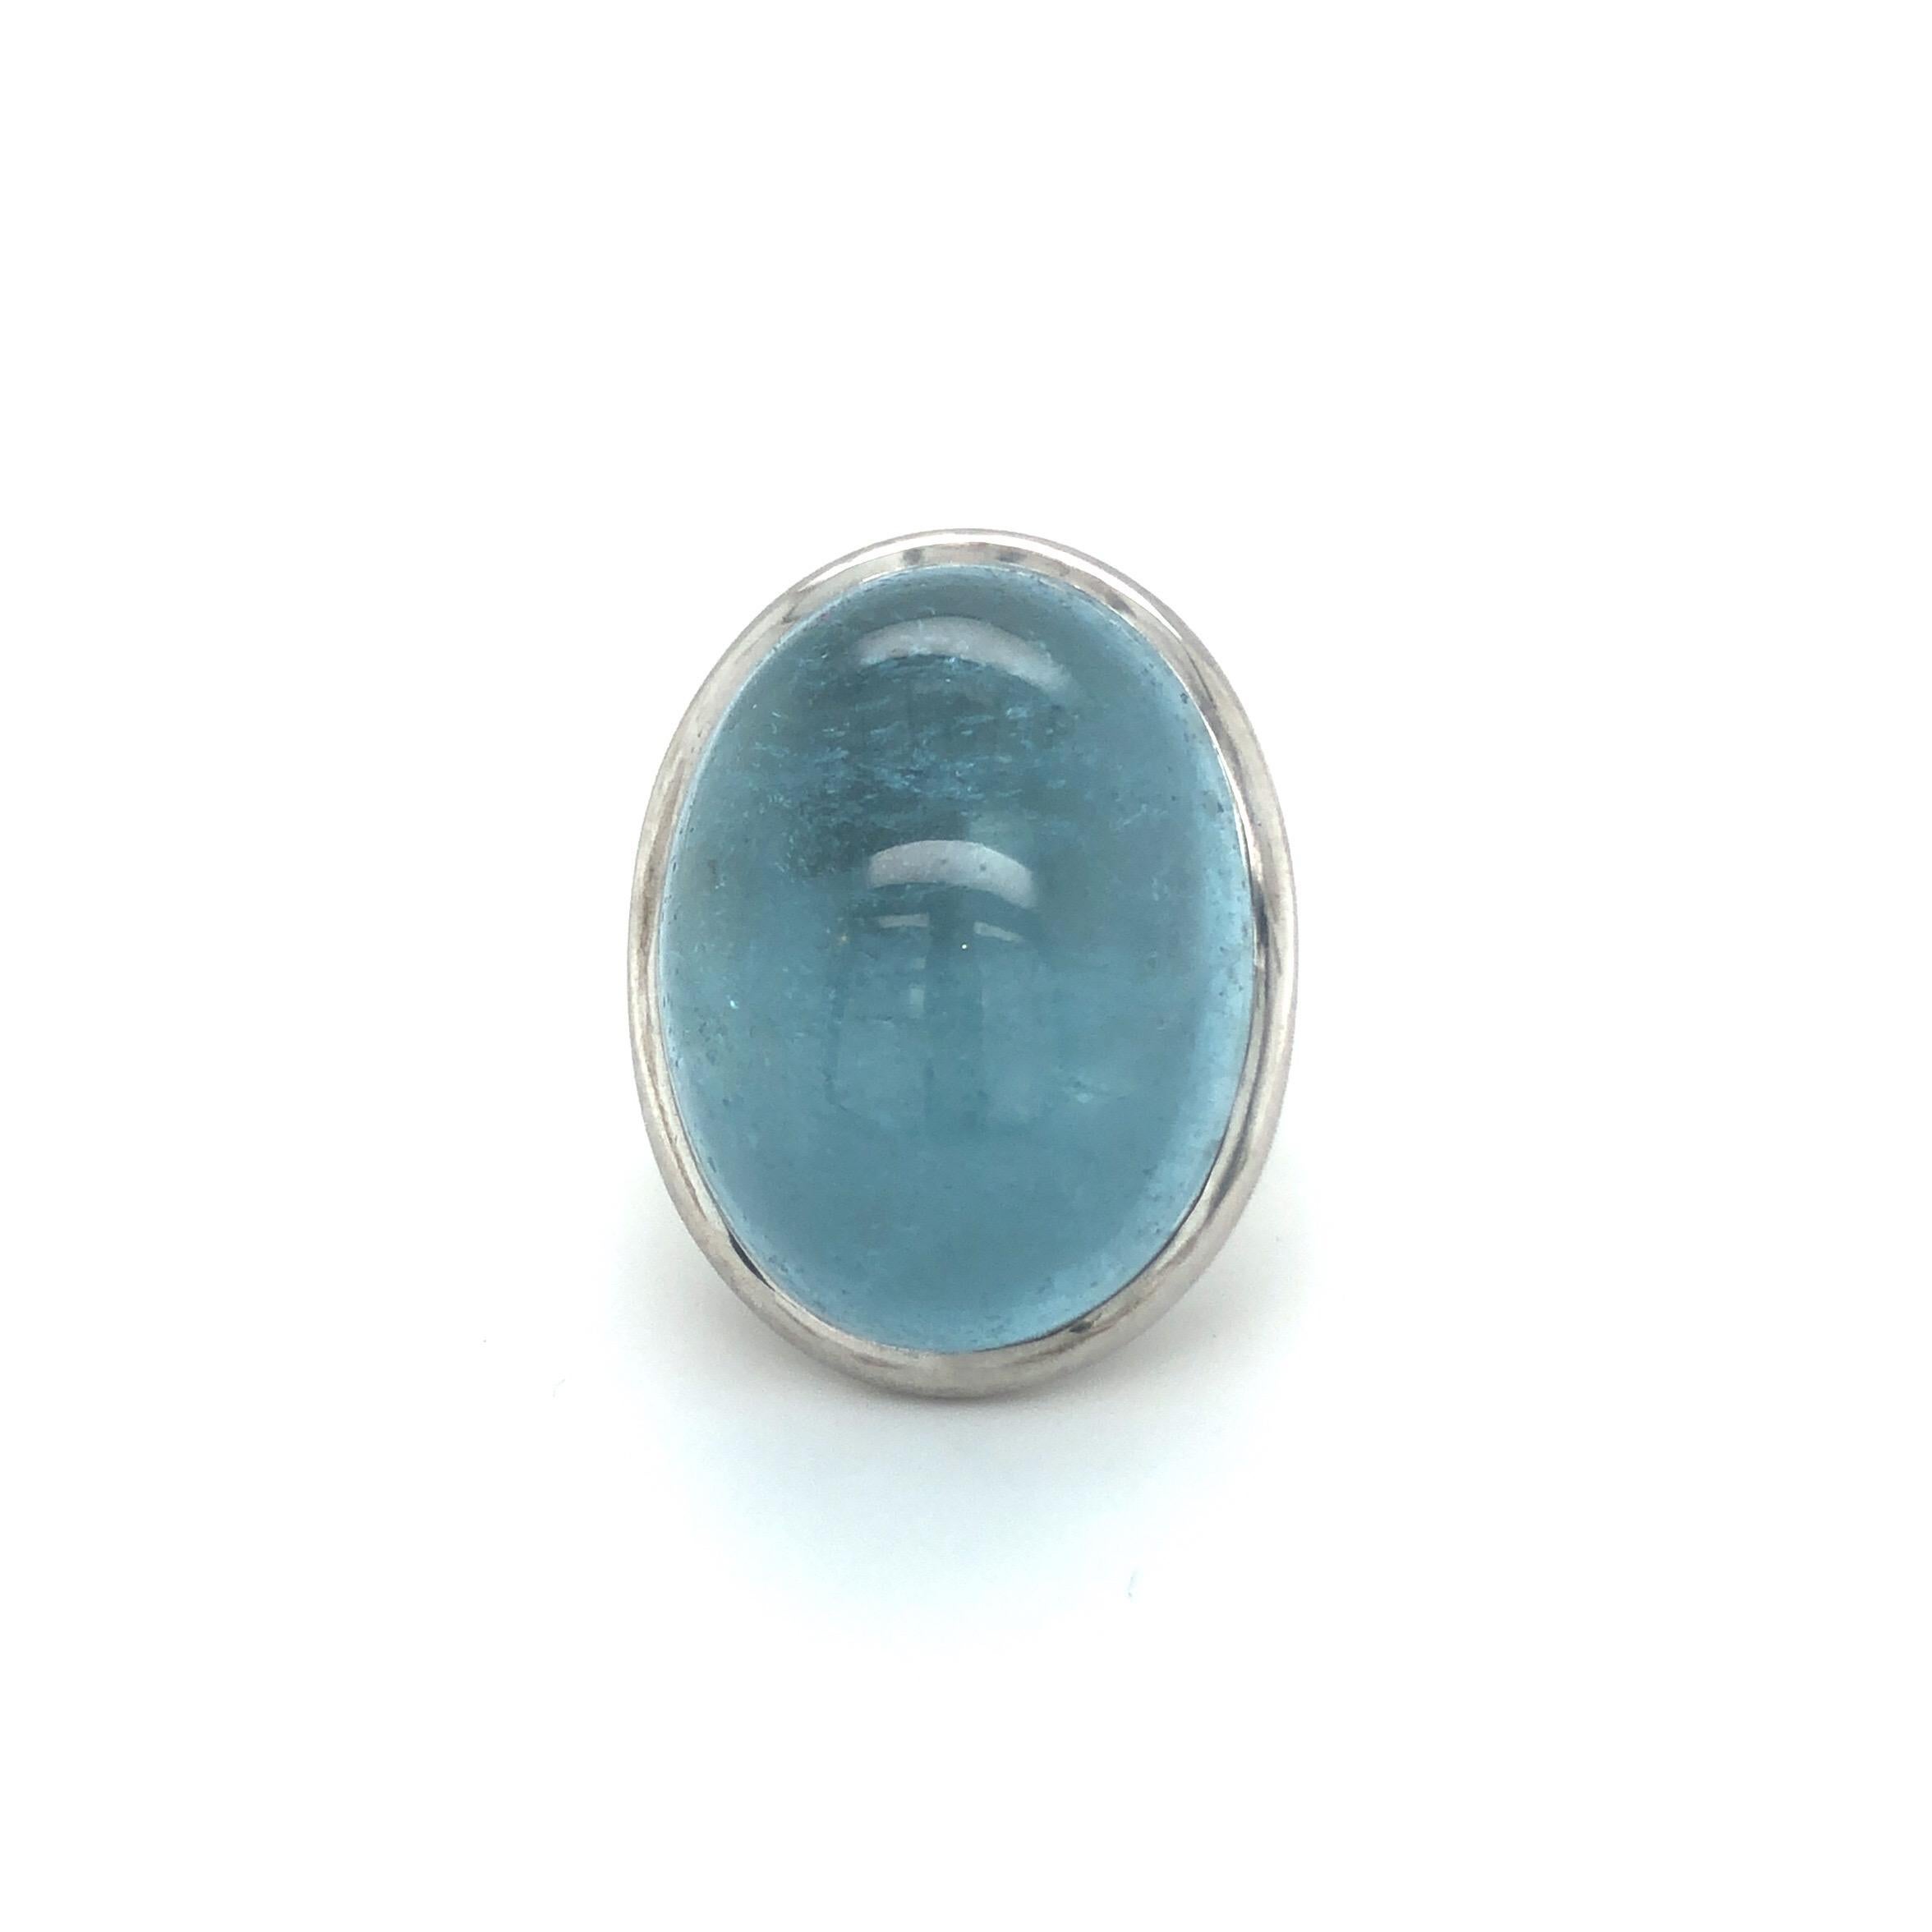 18 karat white gold aquamarine ring by Péclard.
This statement ring by renowned Swiss jeweller Péclard features a bold Aquamarine cabochon of approximately 55 carats.
The setting is crafted in 18 karat white gold. The contrast between the sturdy